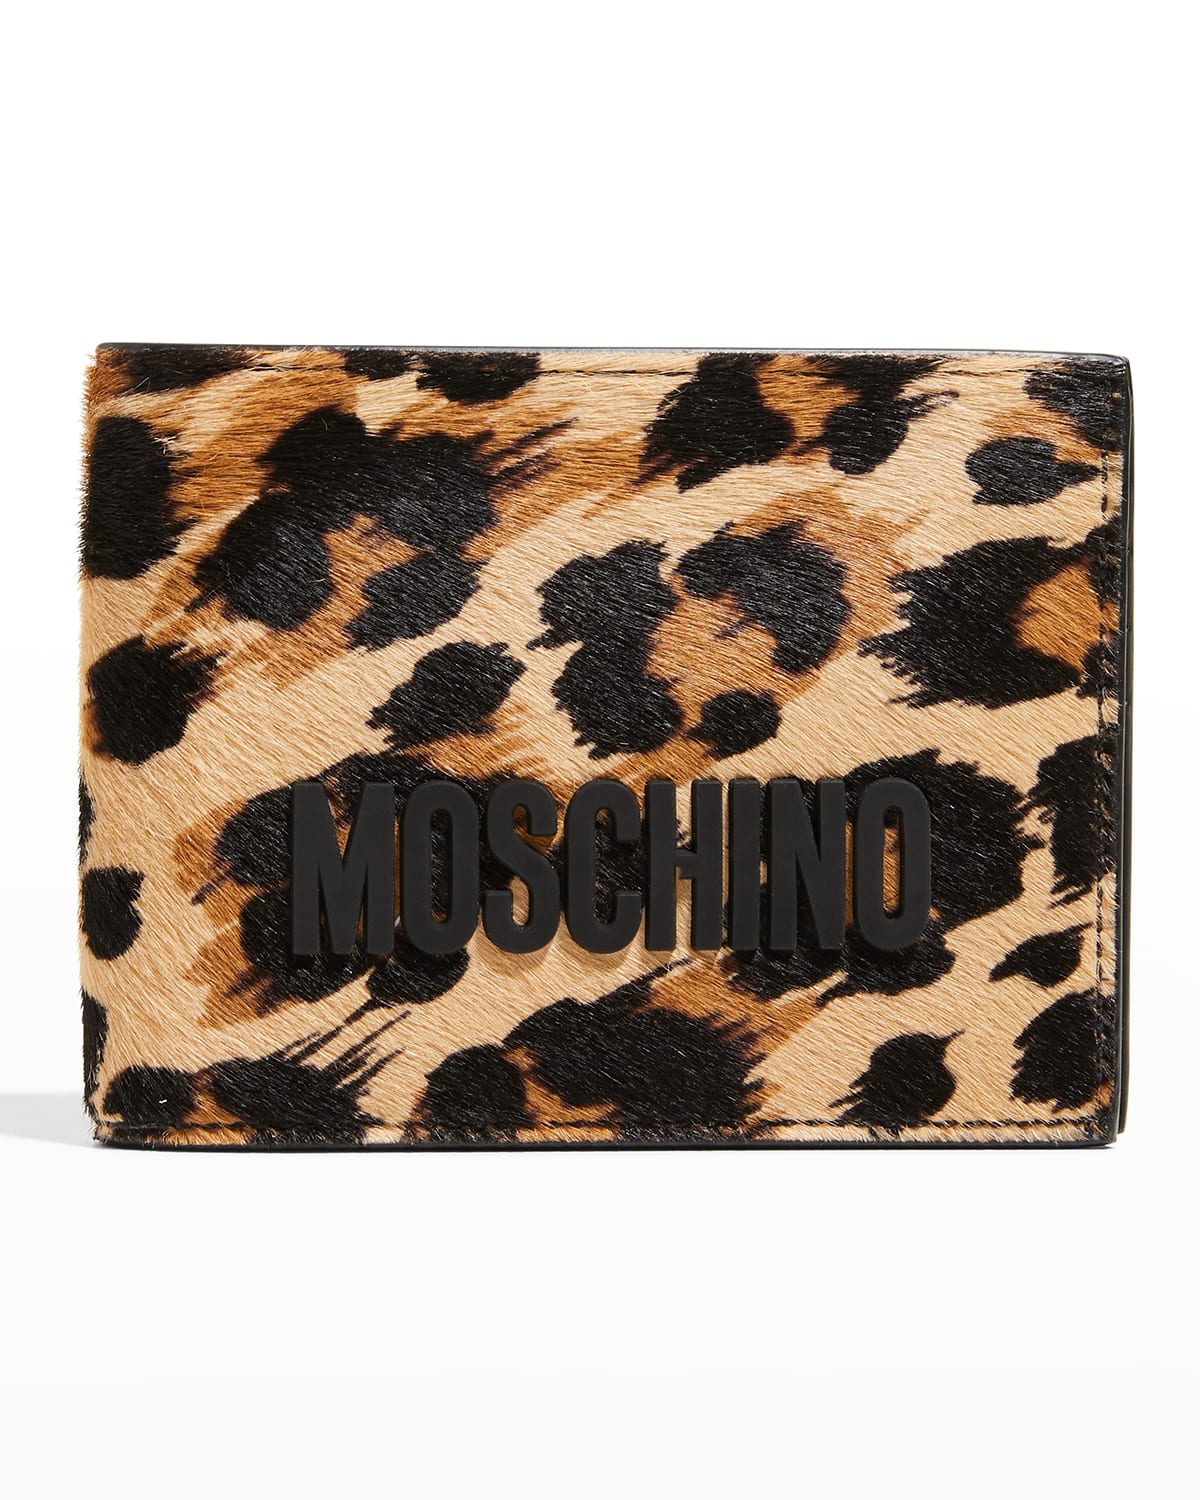 Moschino Men's Calf Hair Leather Wallet